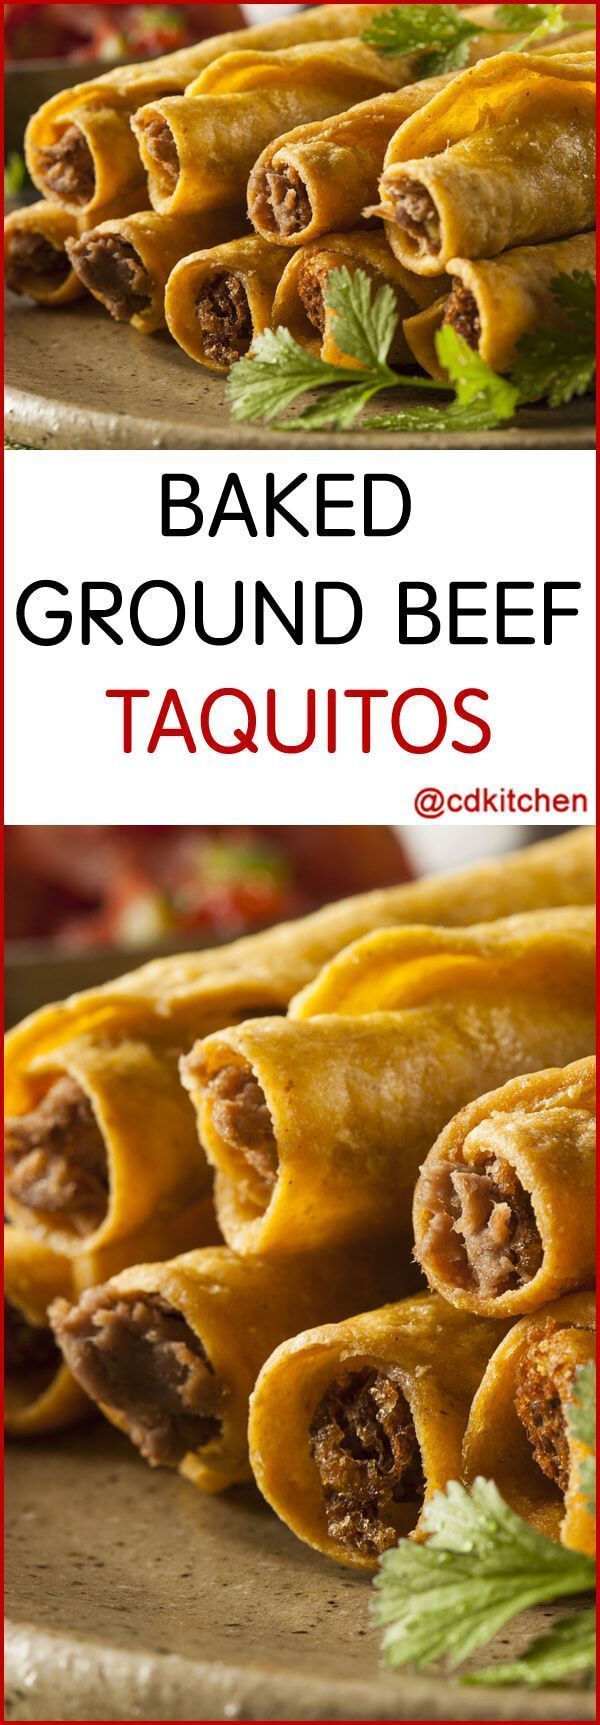 These tasty rolled tacos are filled with spicy ground beef and creamy cheese. Bonus: they are baked instead of fried so they are lighter on calories than the usual restaurant versions. | CDKitchen.com -   21 spicy hamburger recipes
 ideas